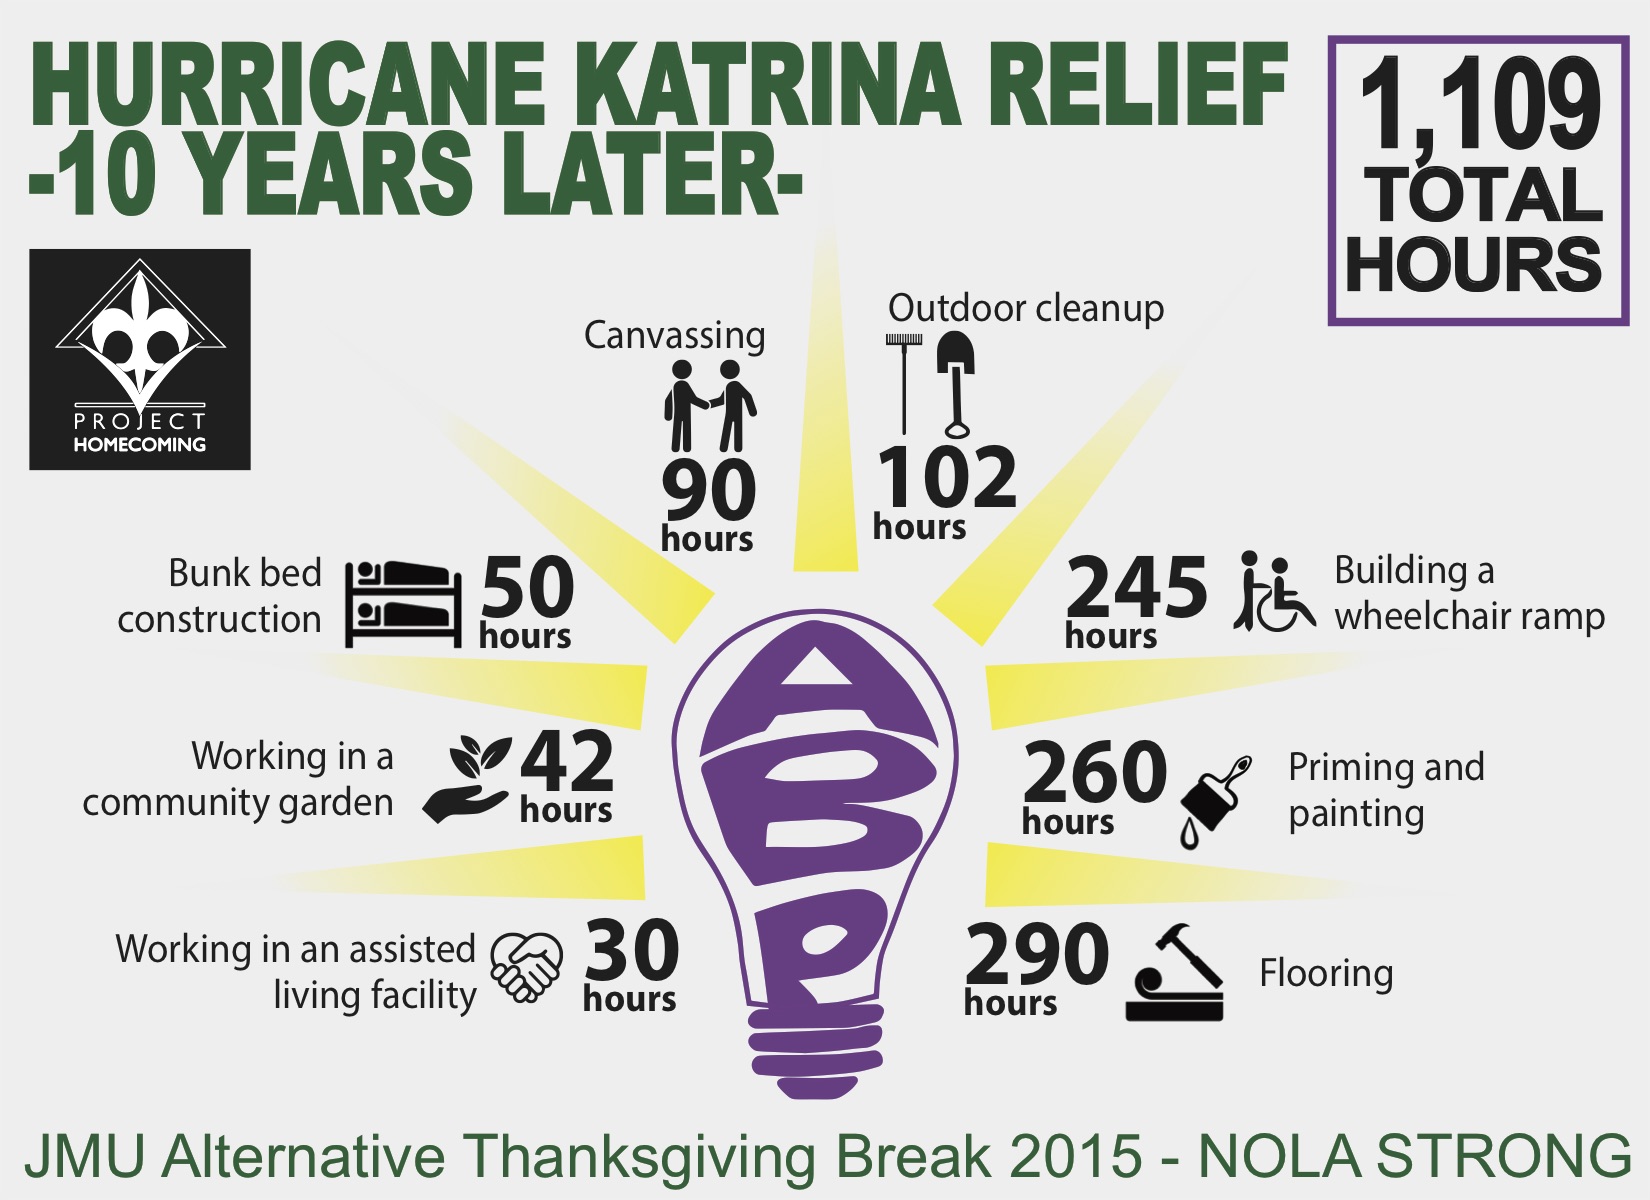 Alternative Thanksgiving Break. Total Hours=1,109. Celebrating 10 years strong with rebuilding New Orleans. 